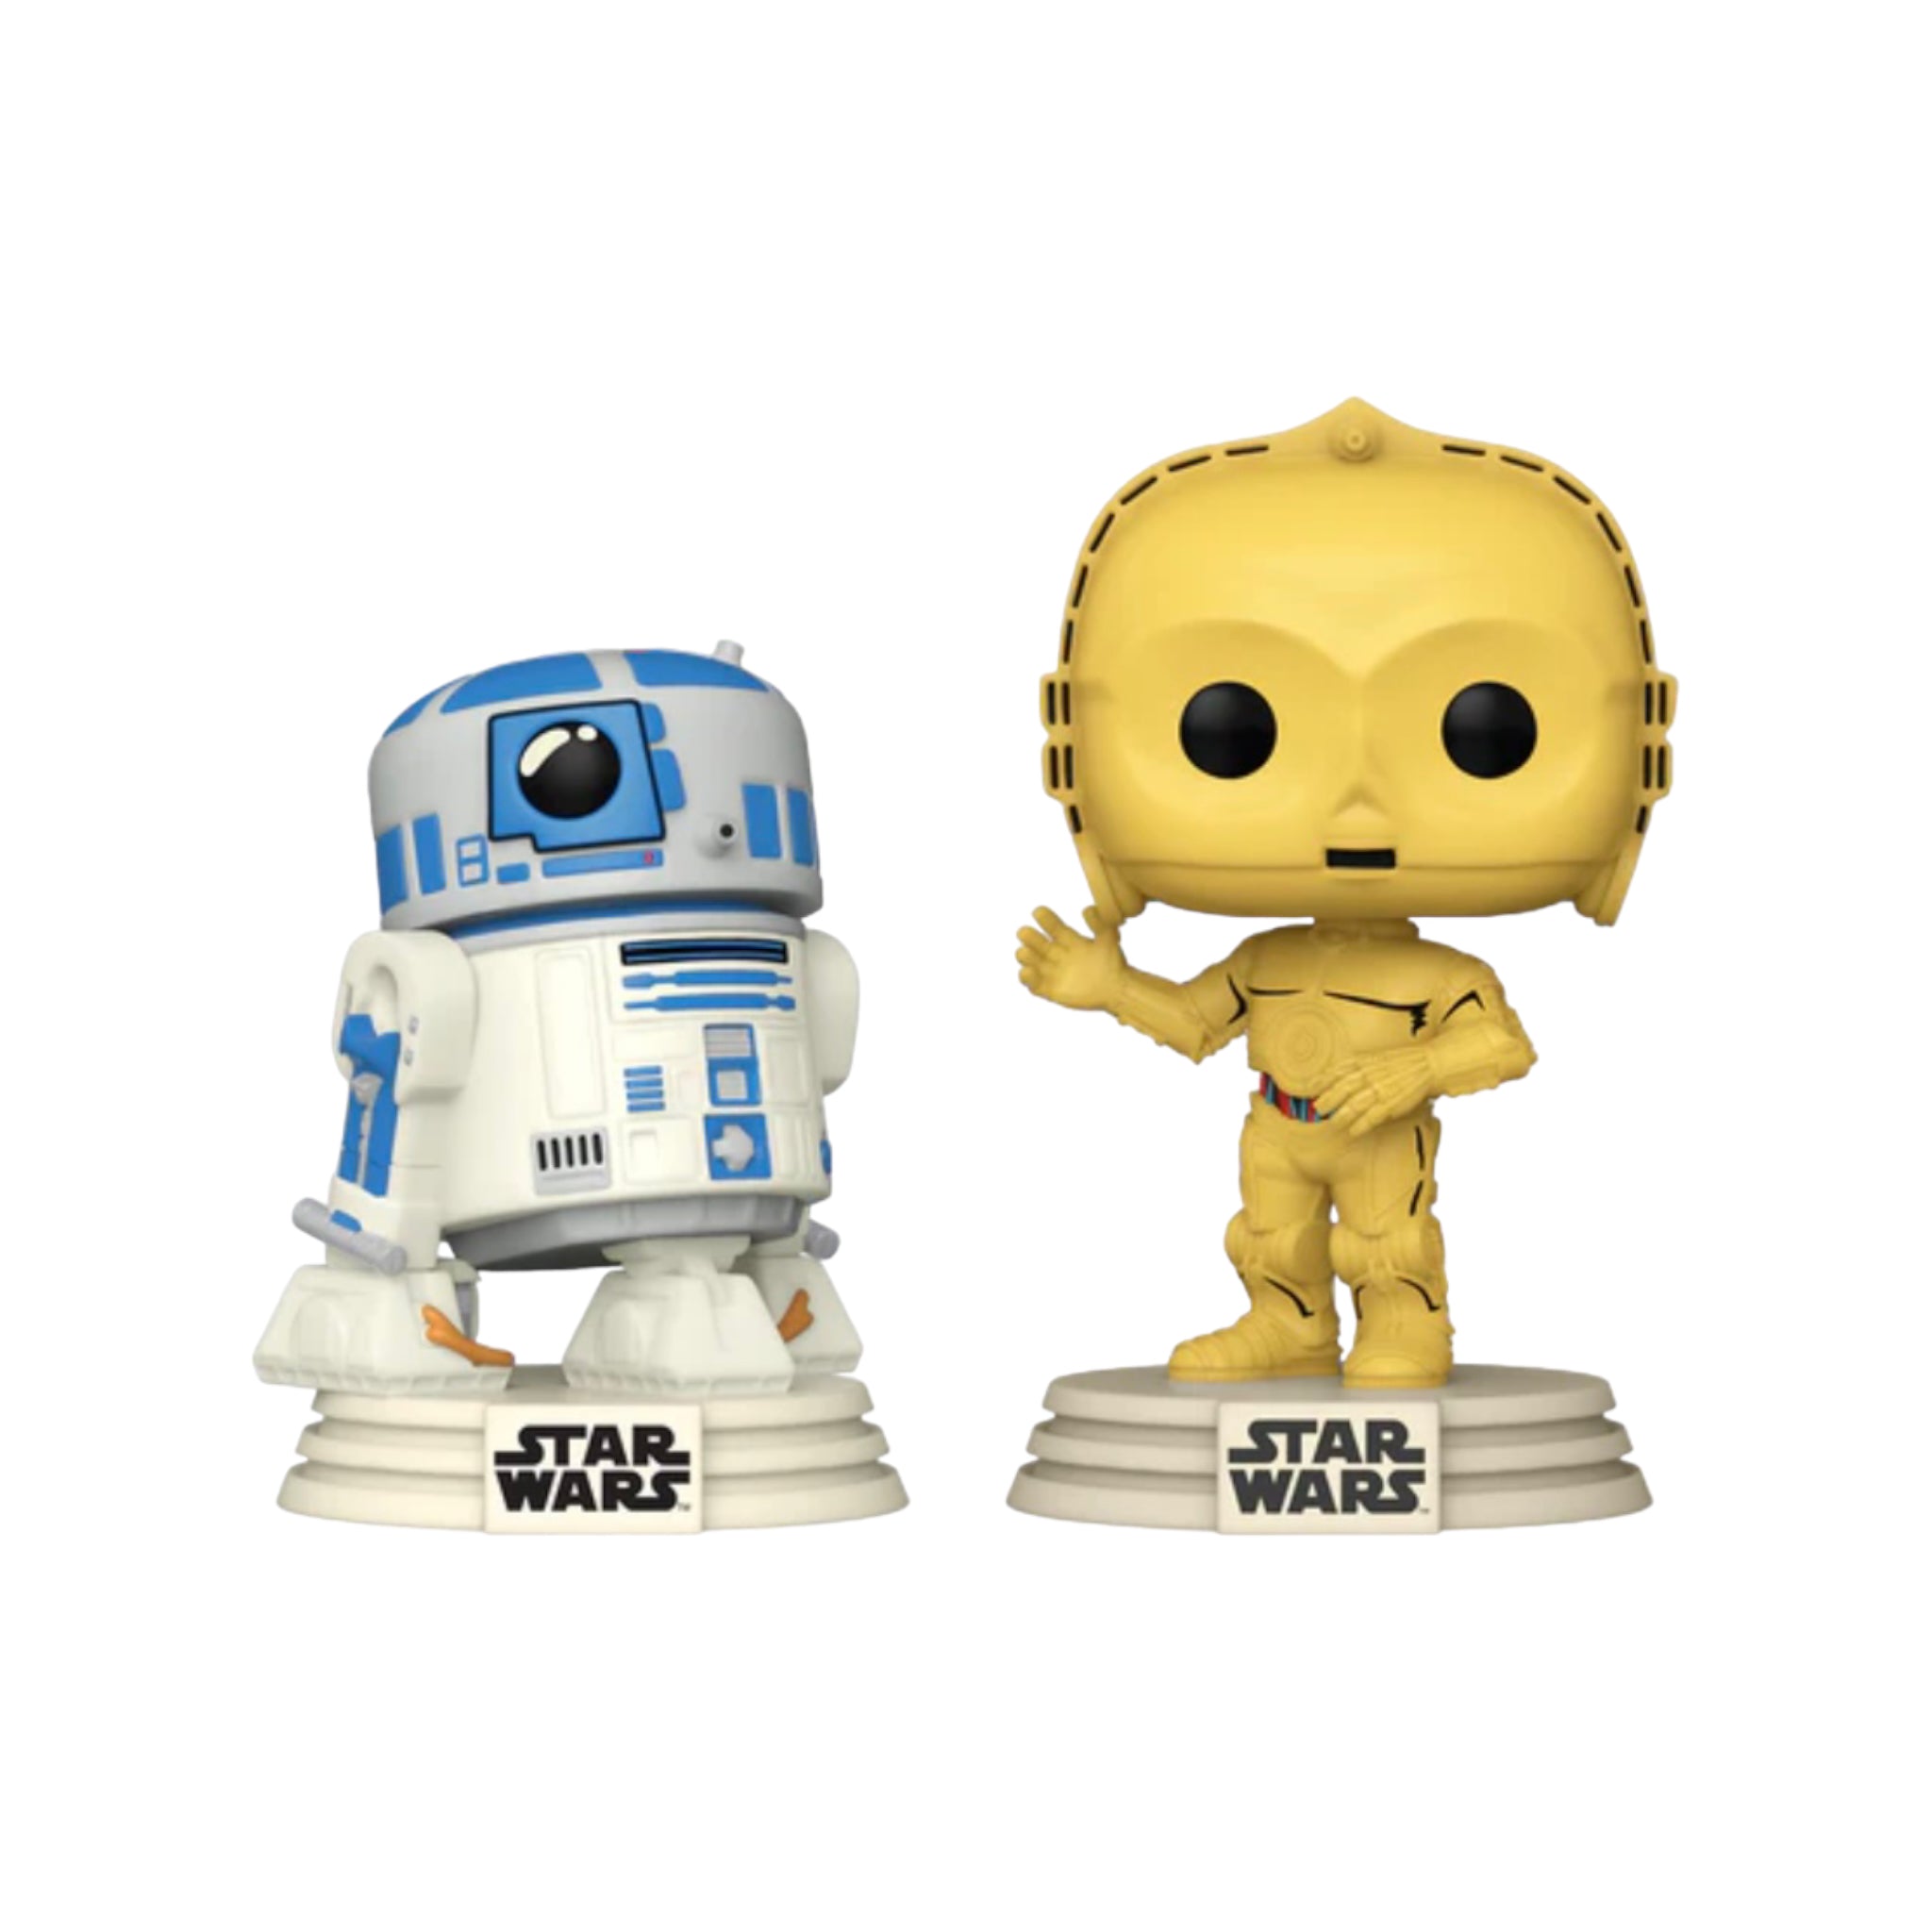 R2-D2 & C-3PO (Retro Reimagined) 2 Pack Funko Pop! - Star Wars - Special Edition